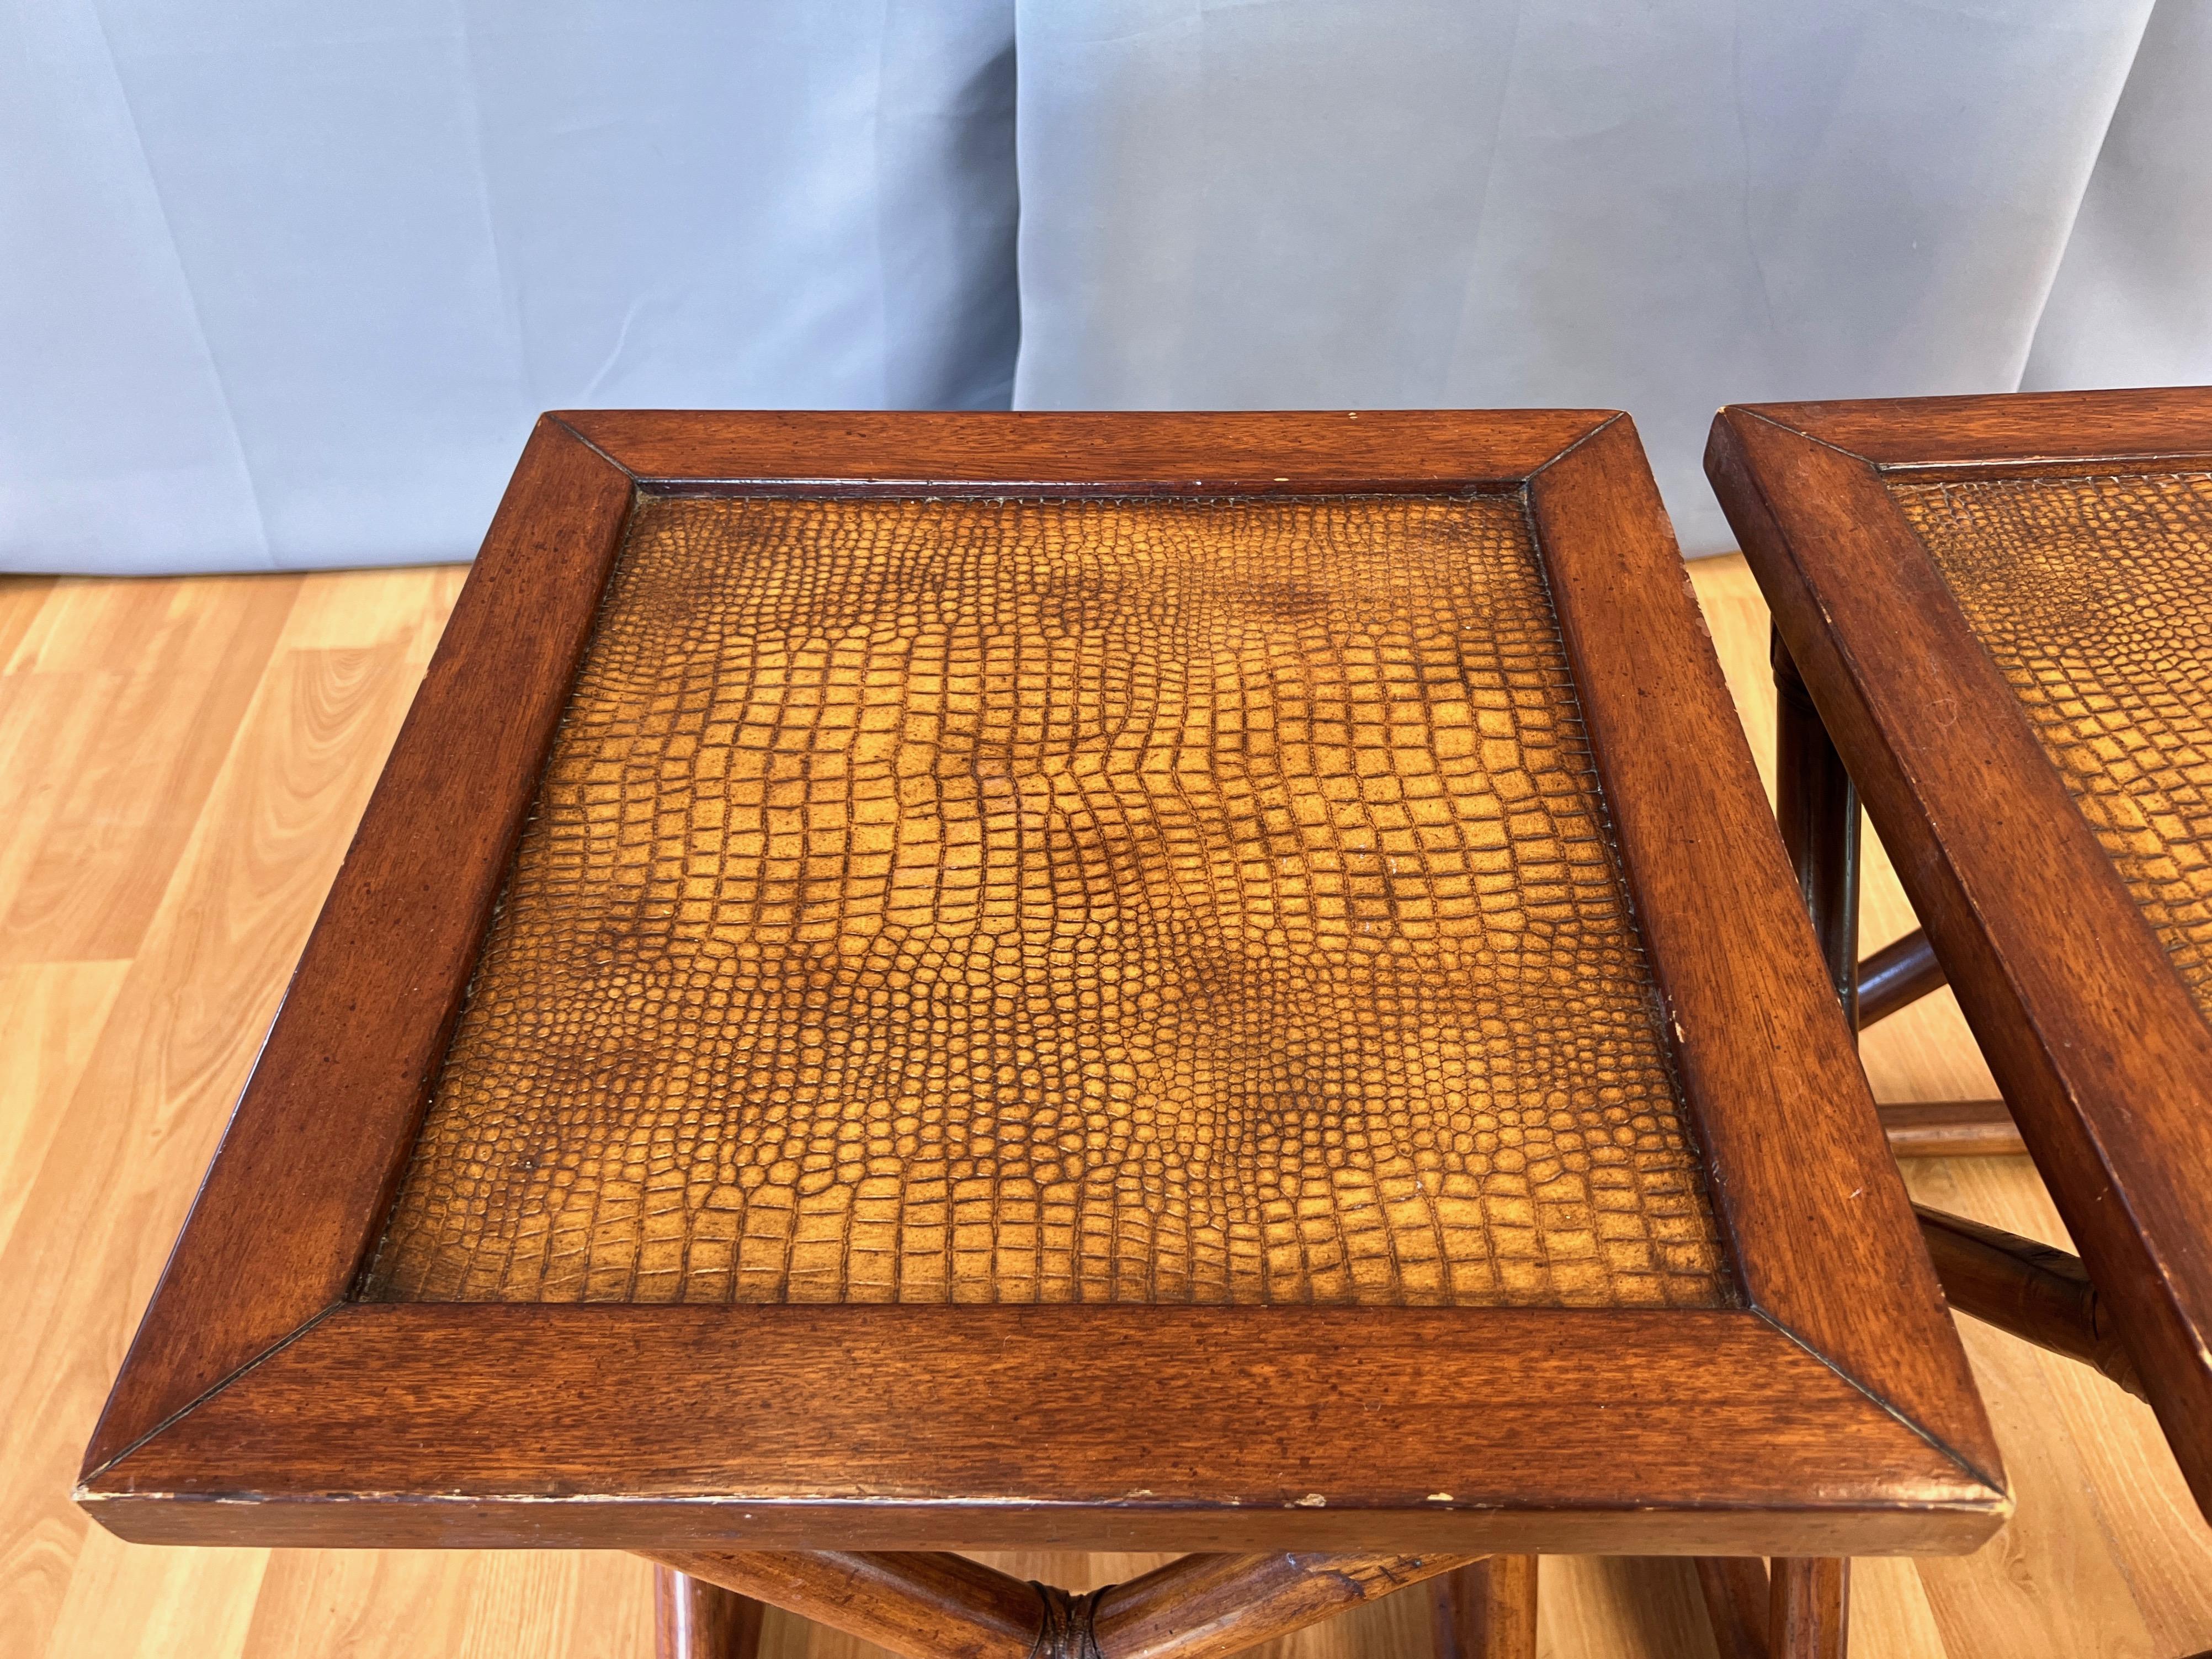 Pair of Palecek Rattan End Tables with Faux Crocodile Leather Tops, c. 2010 For Sale 3